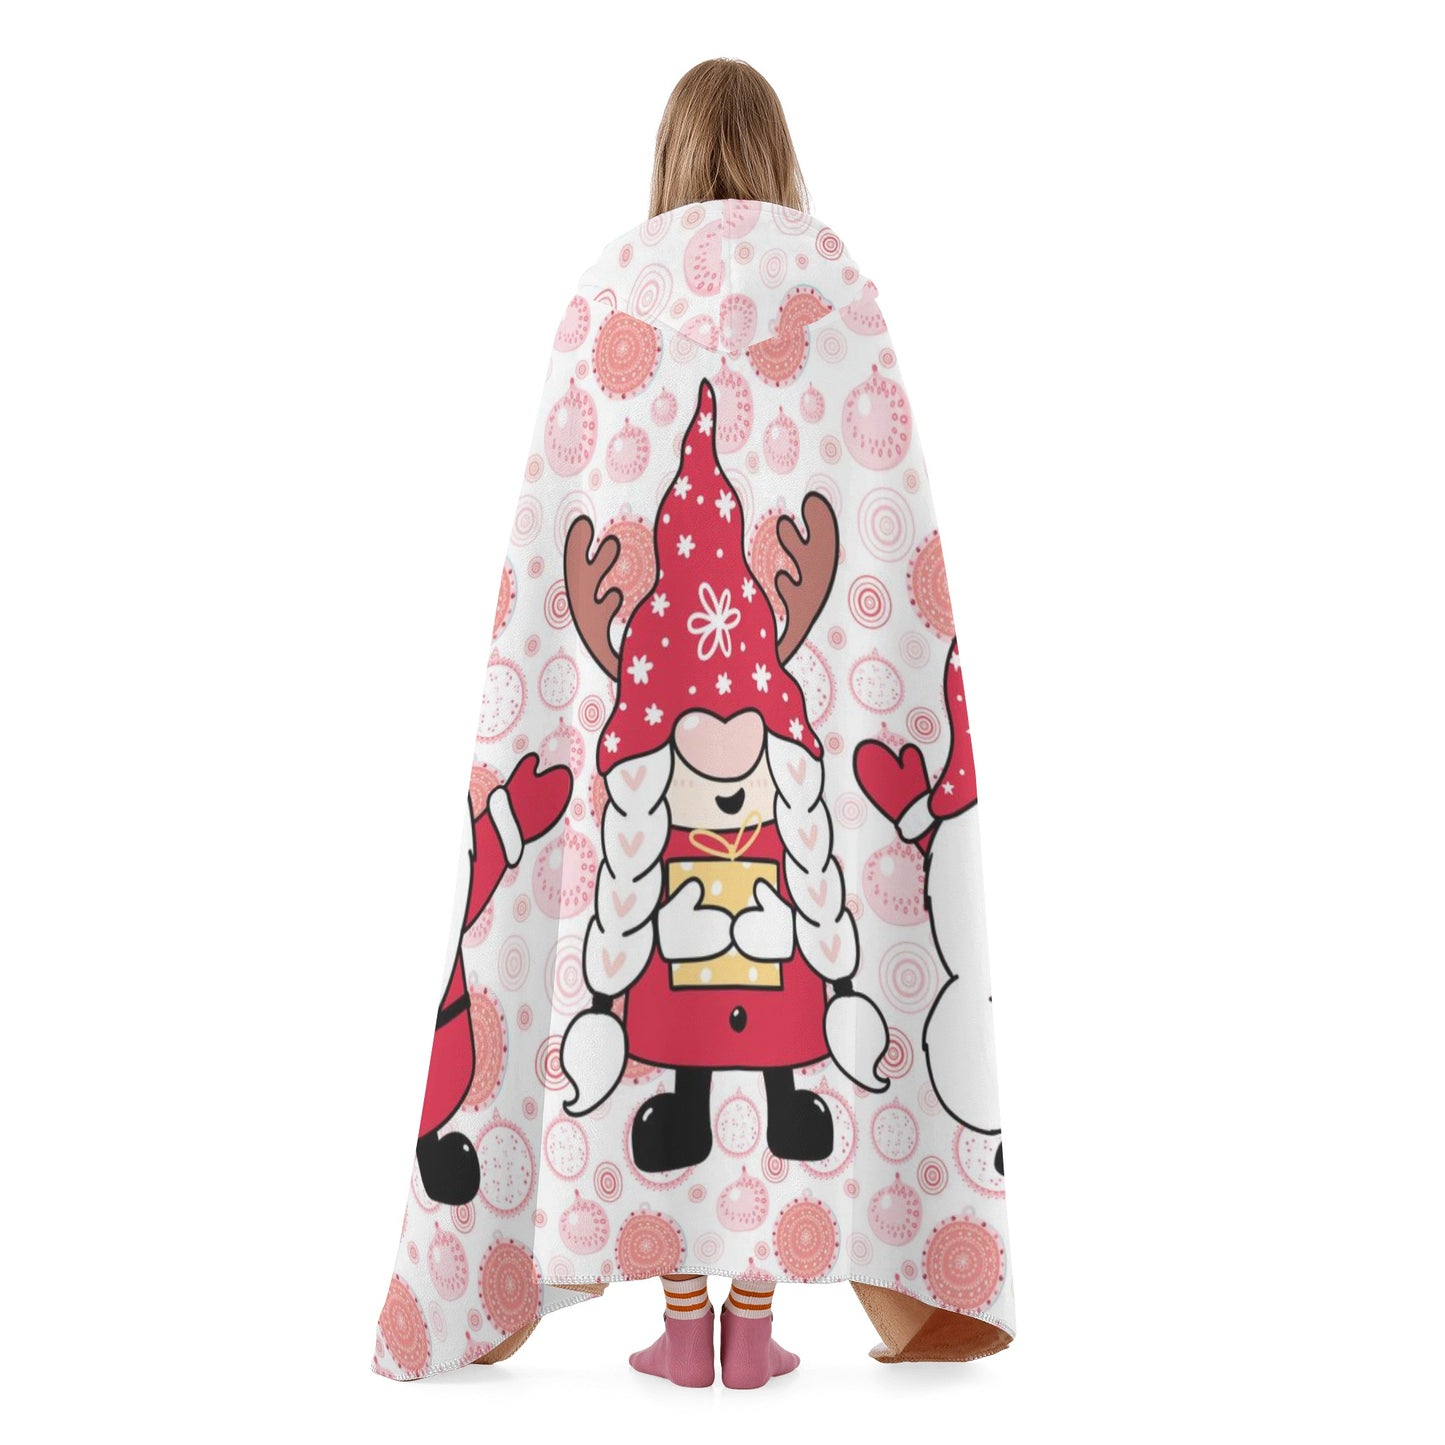 For the Love of Gnomes Hooded Blanket